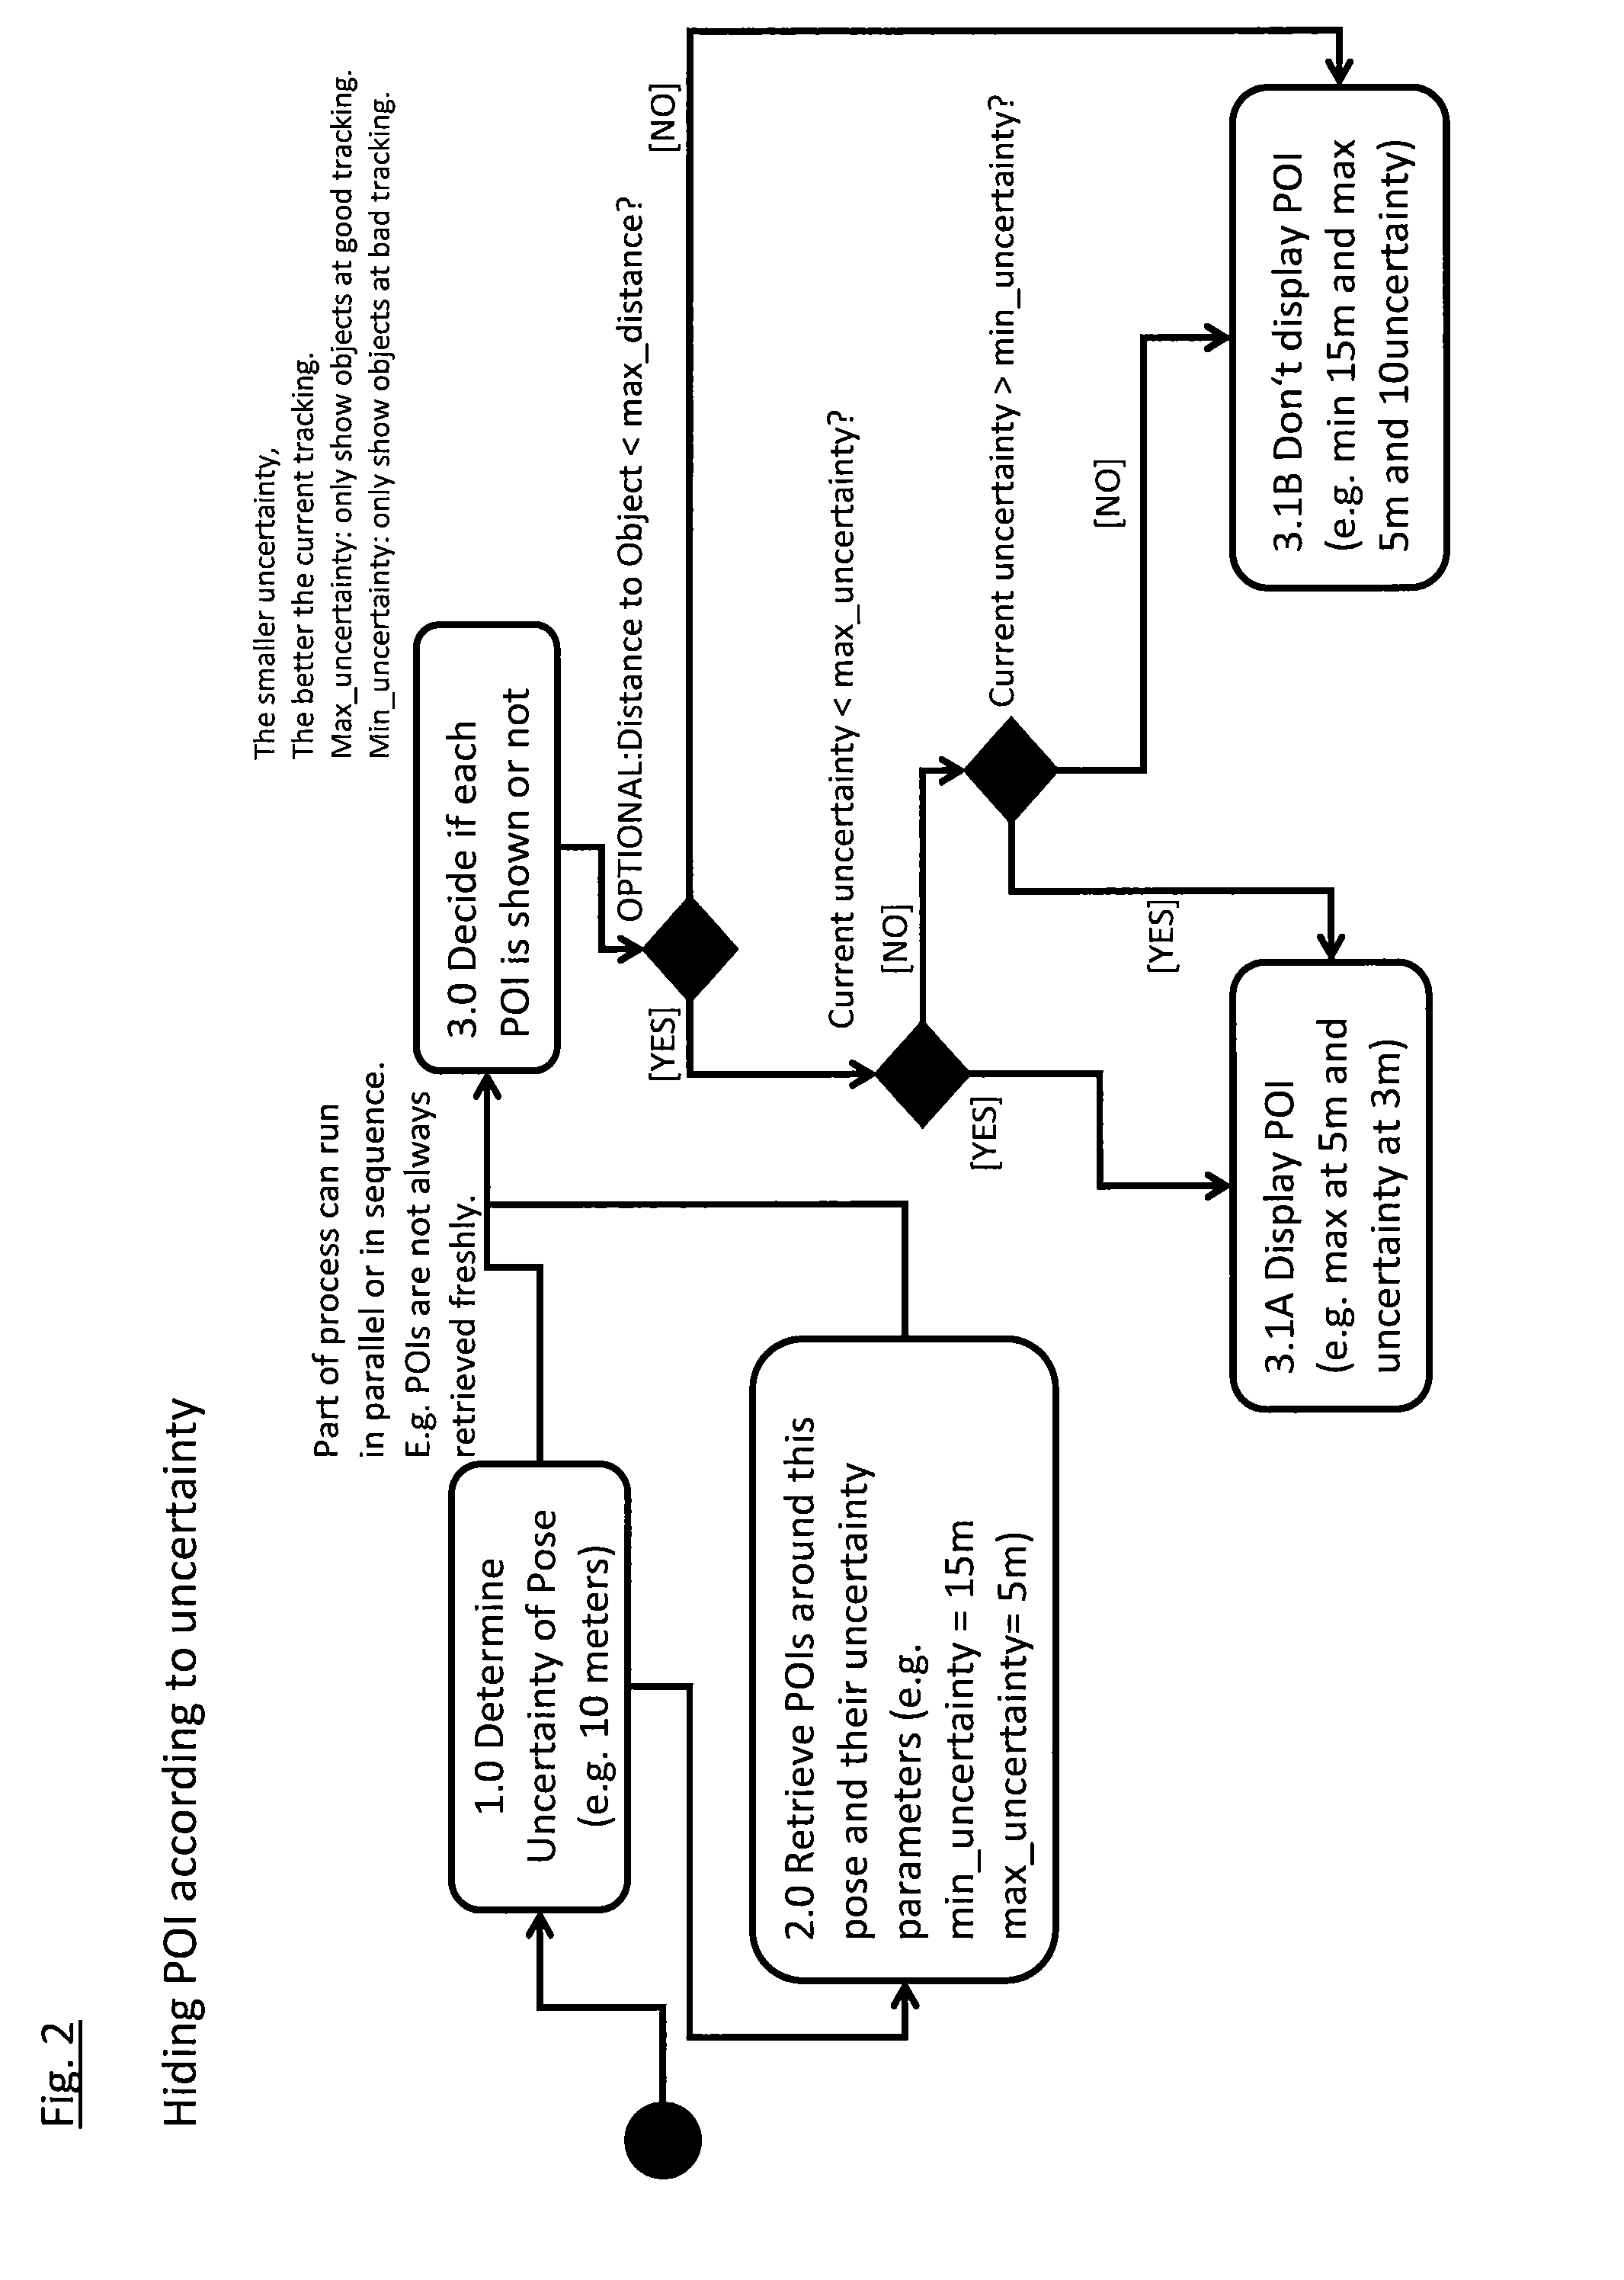 Method of displaying virtual information in a view of a real environment